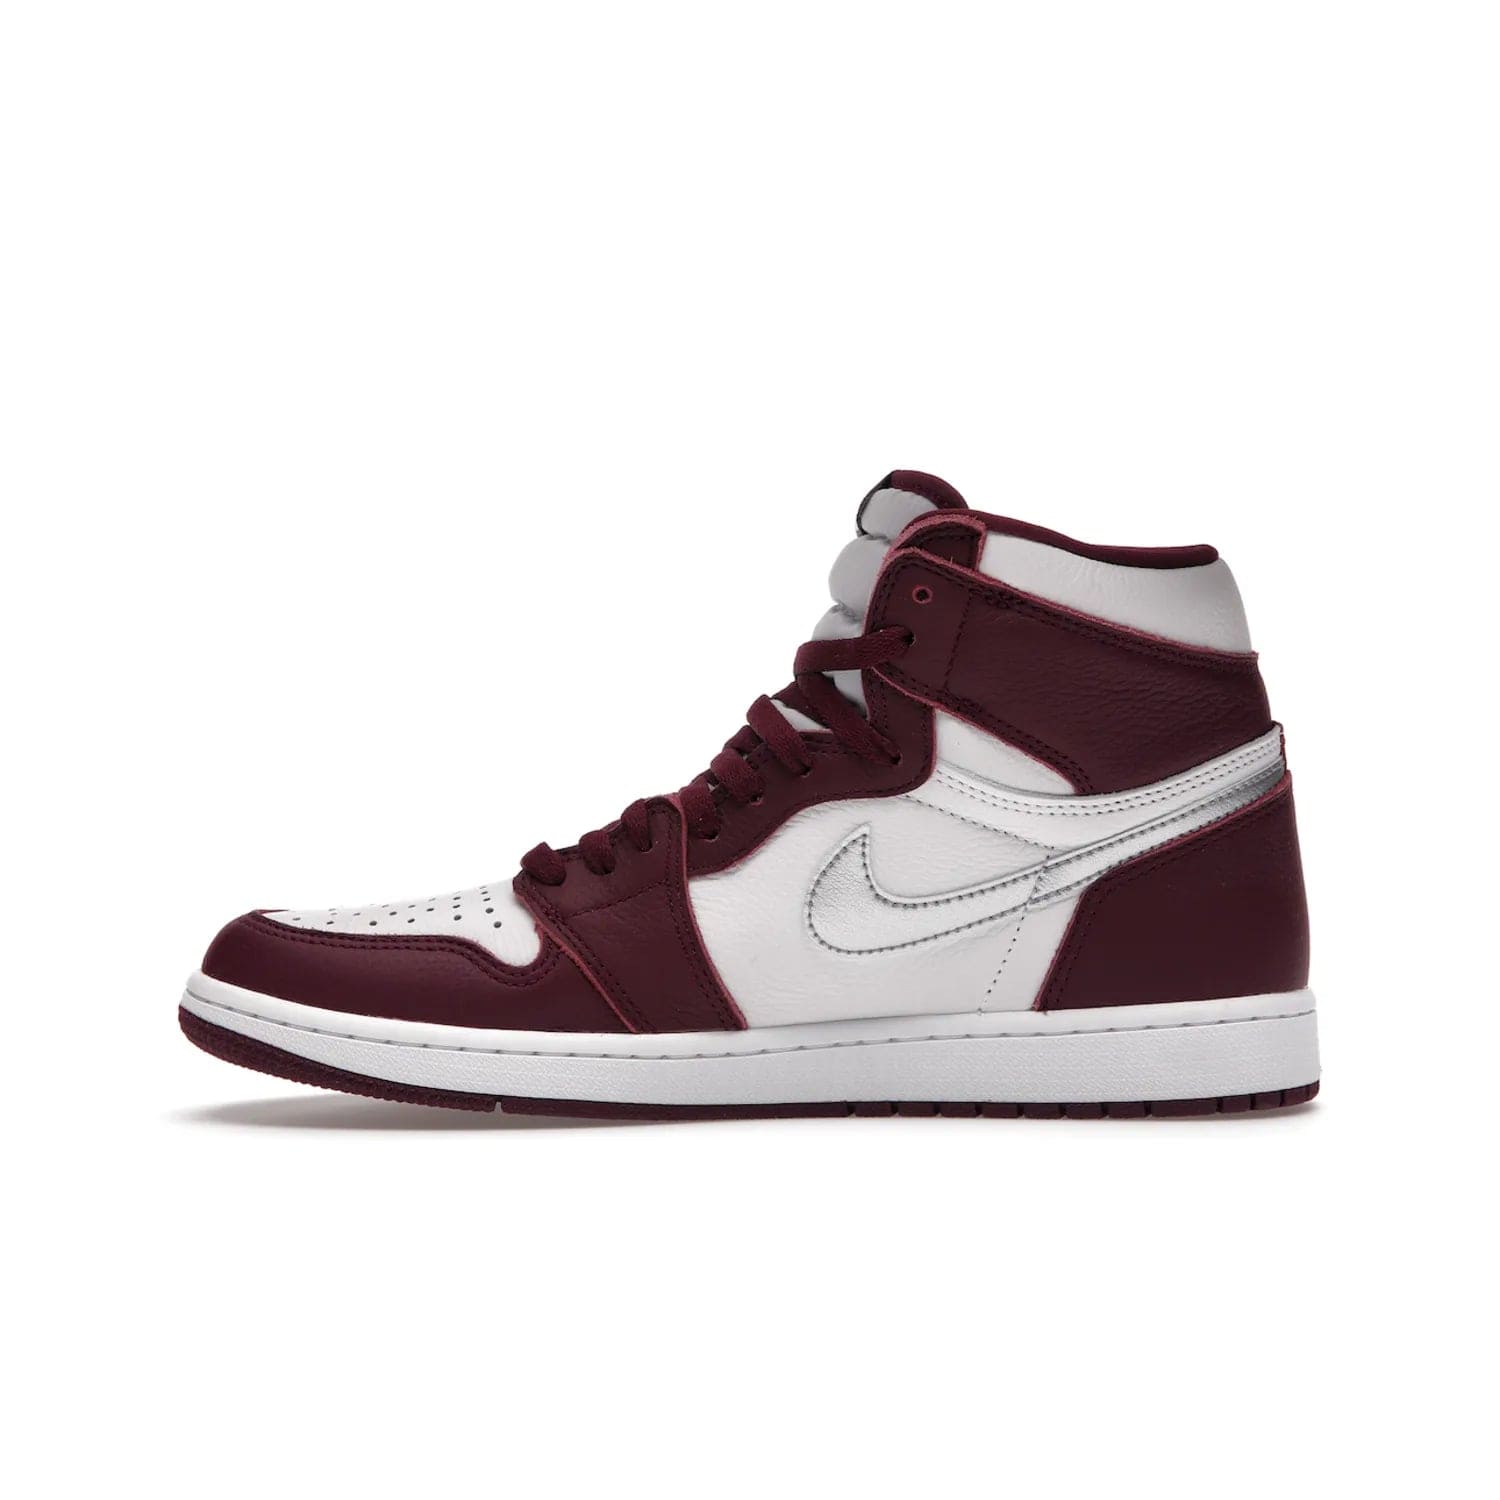 Jordan 1 Retro High OG Bordeaux - Image 19 - Only at www.BallersClubKickz.com - Shop the classic Air Jordan 1 High Bordeaux with a modern high-top cut. The timeless Bordeaux and White-Metallic Silver colorway, releasing Nov 20, 2021, is perfect for practice or a night out.